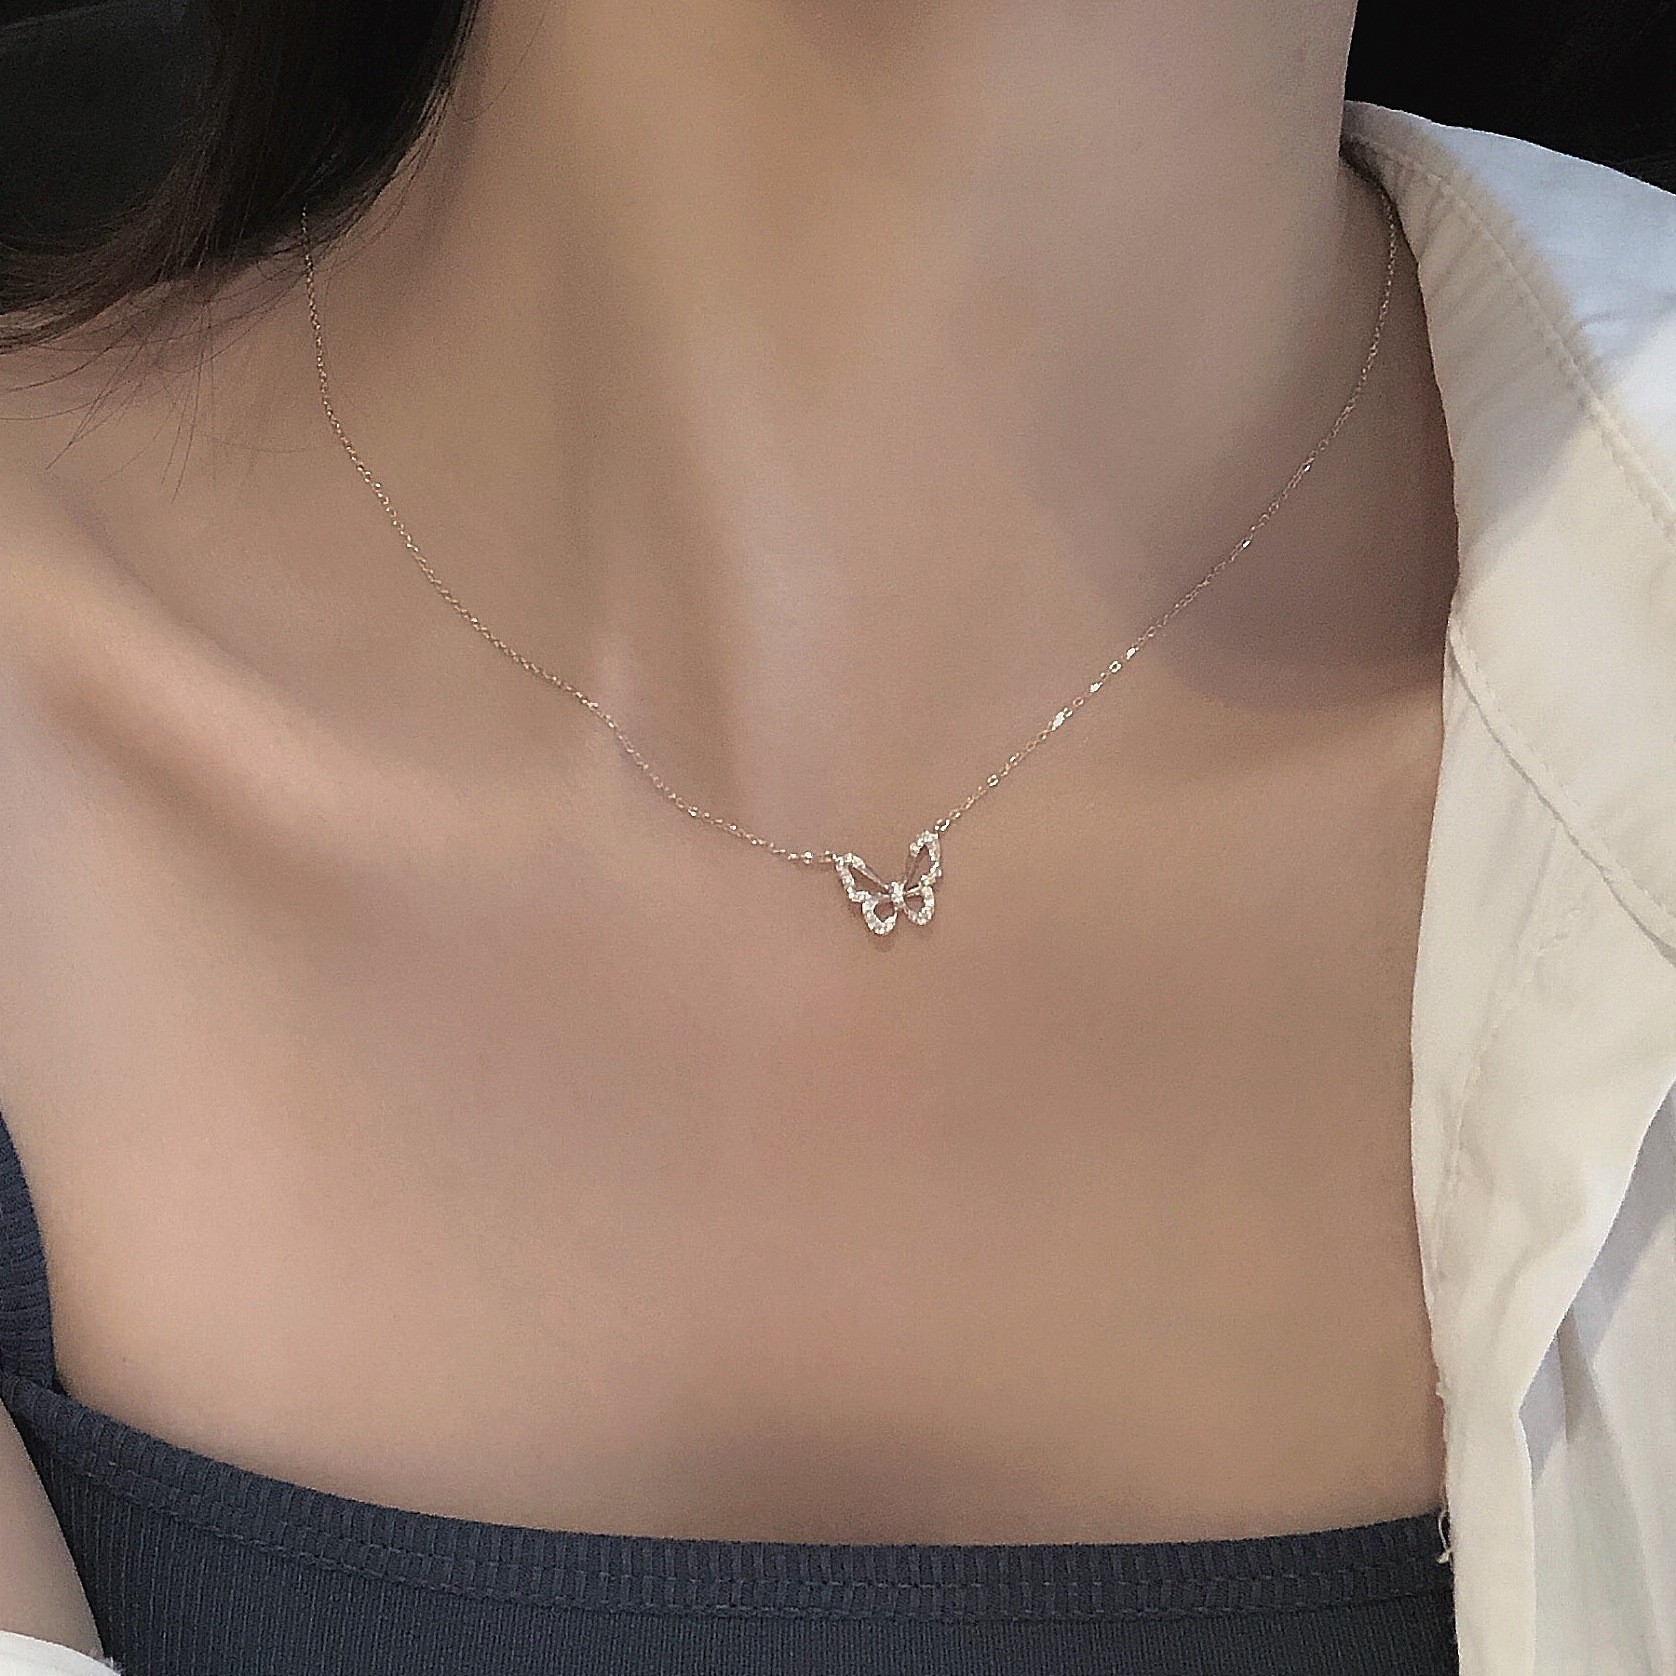 Light Luxury Minority Square Shell Necklace for Women Summer Design Versatile Simple Clavicle Chain Ins Cold Style Ornament